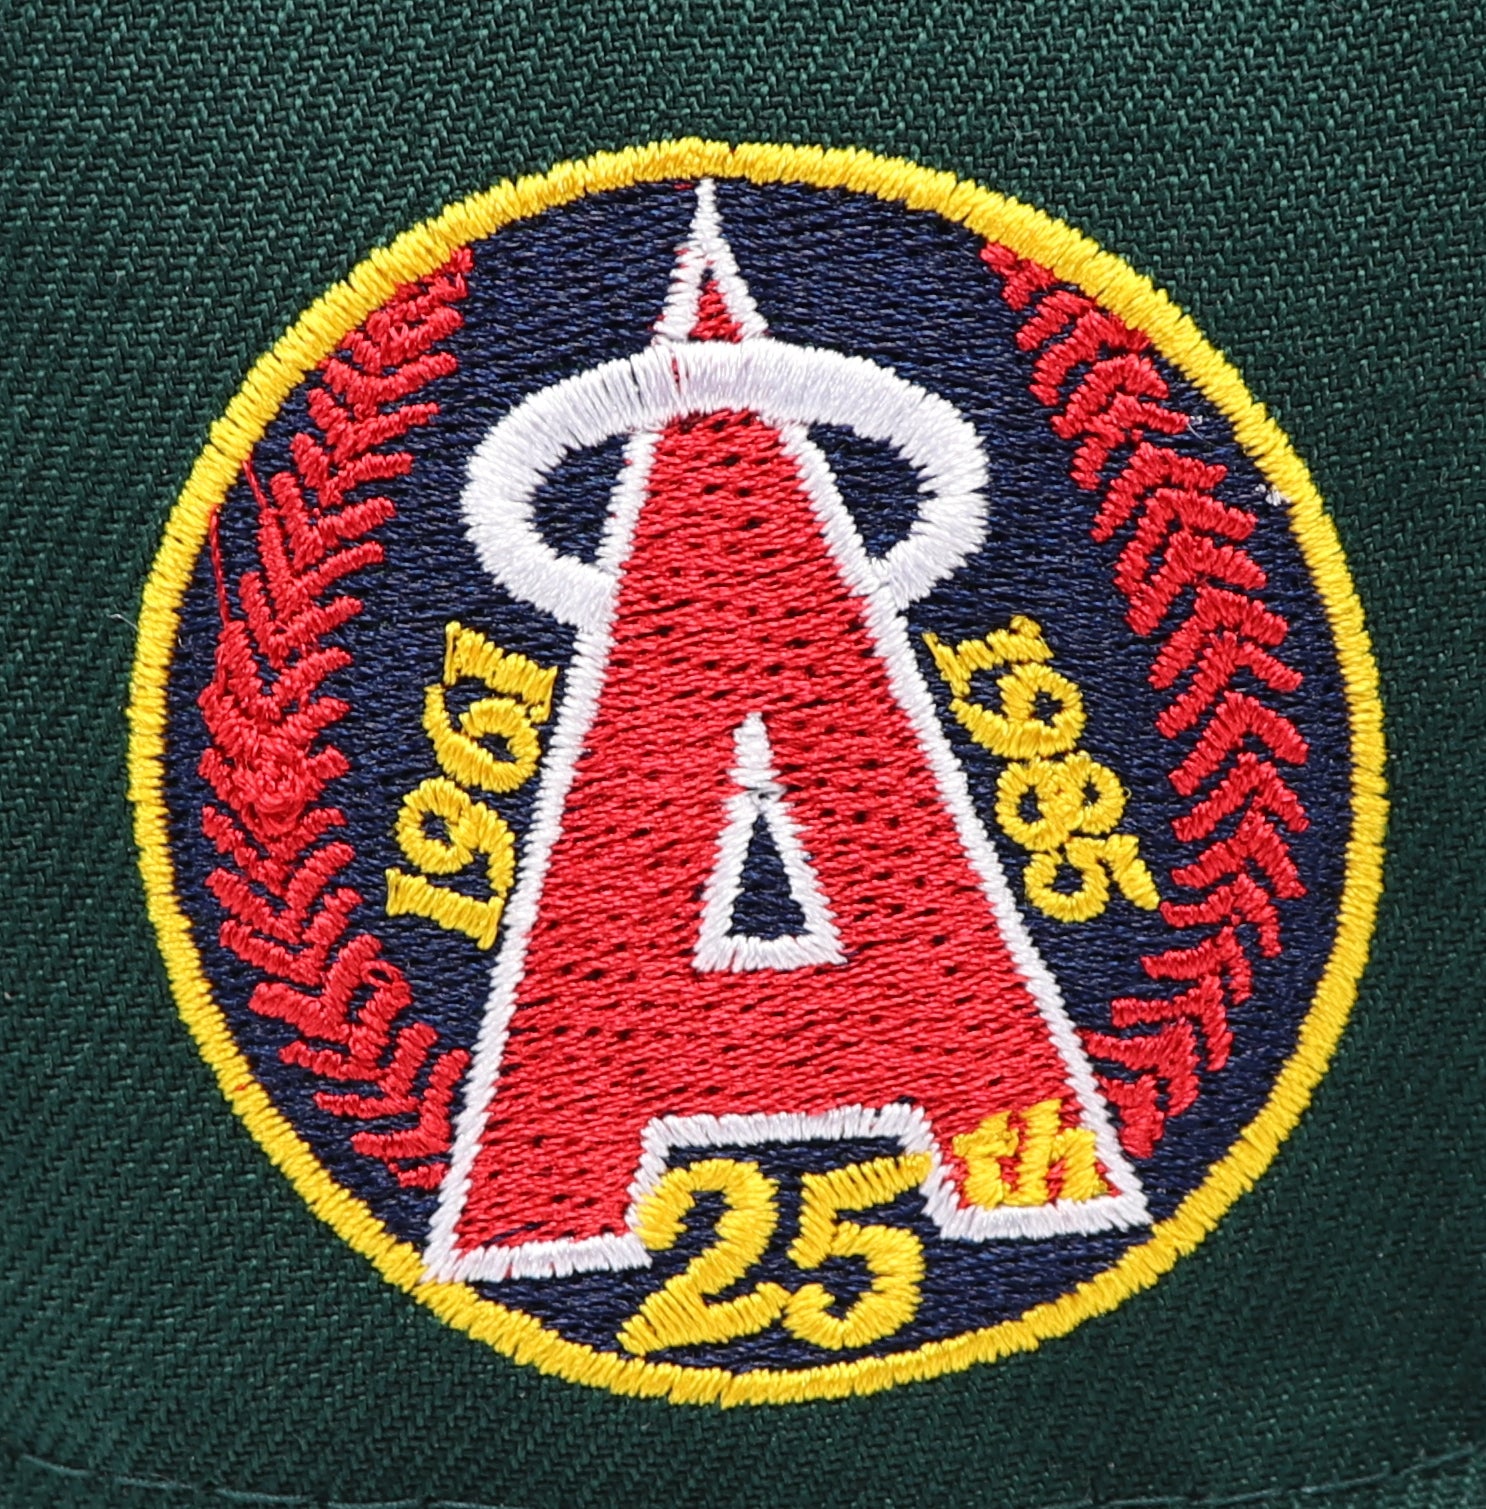 CALIFORNIA ANGELS (DK GREEN) (25TH ANN "1961-1985") NEW ERA 59FIFTY FITTED (OFF-WHITE UNDER VISOR)